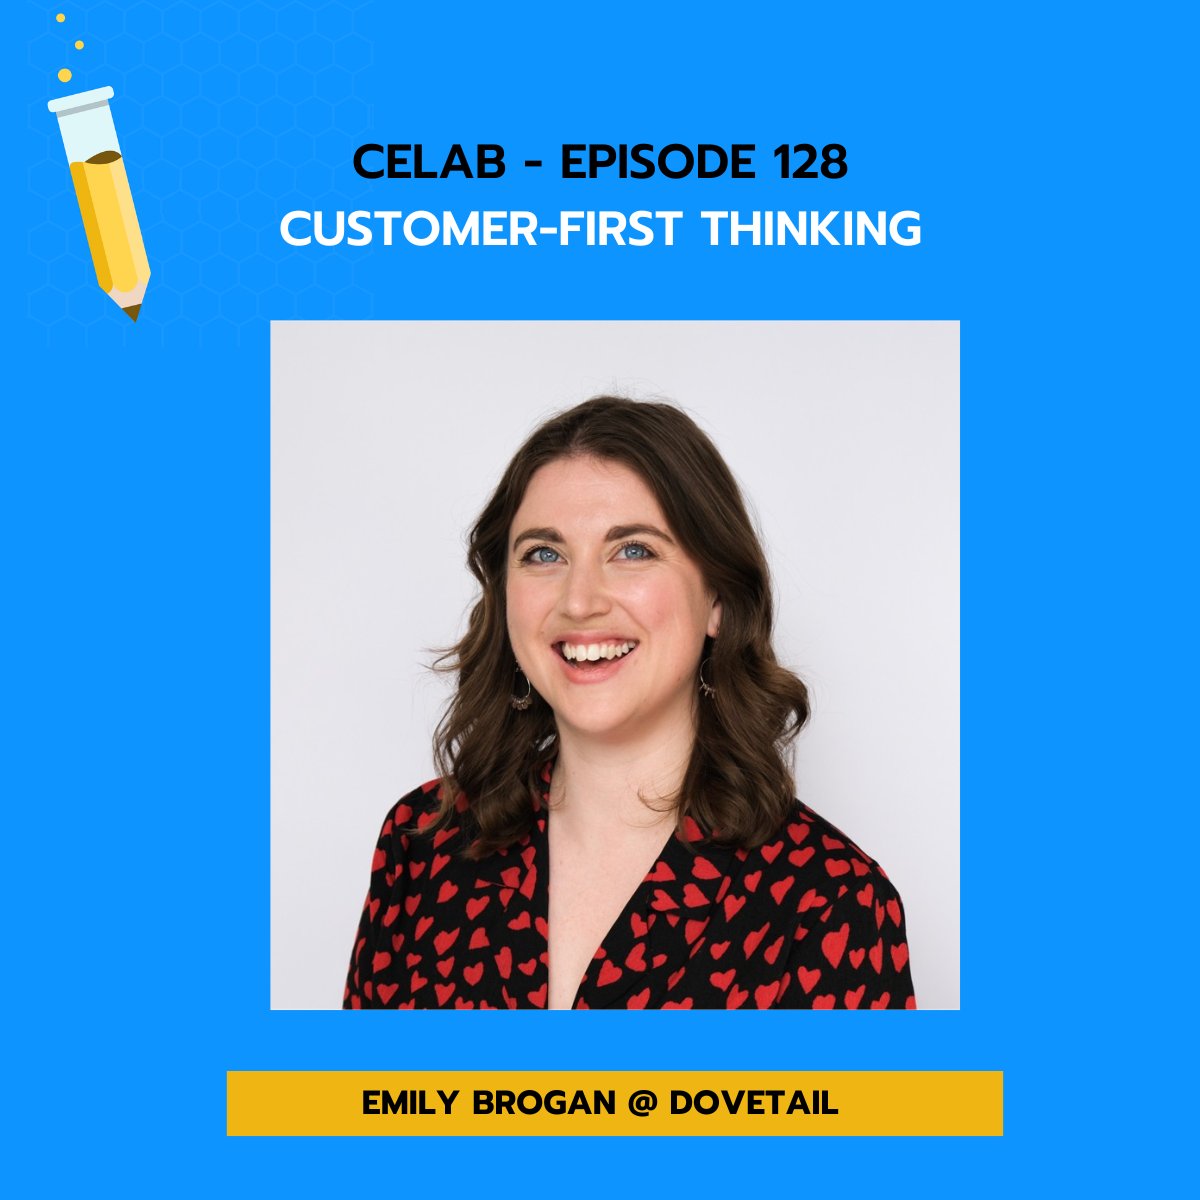 Check out this insightful interview on the CELAB podcast featuring Emily Brogan, #CustomerEducation Manager at @hidovetail and @davederington! They dive into prioritising customers and Dovetail's role in delivering insights: bit.ly/3To4QYC #CustomerSuccess